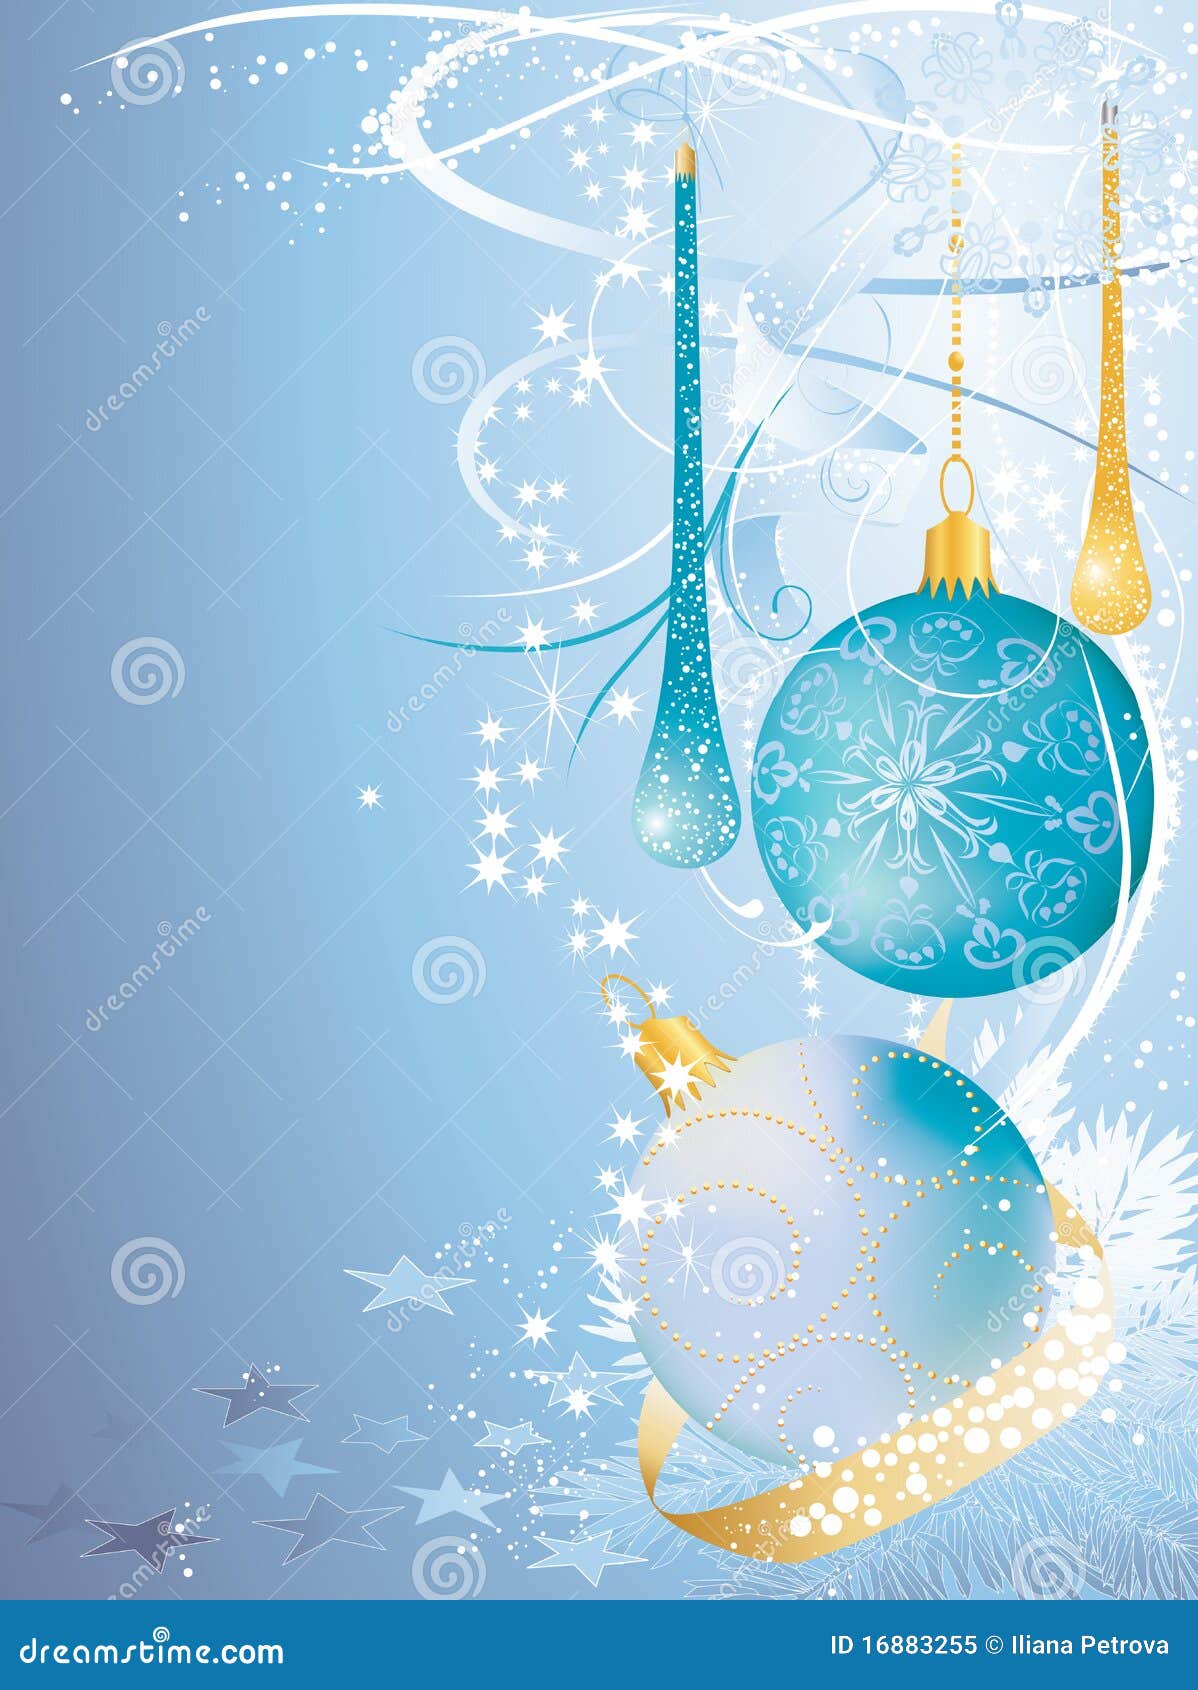 Christmas Blue and Gold Card Stock Vector - Illustration of artistic ...